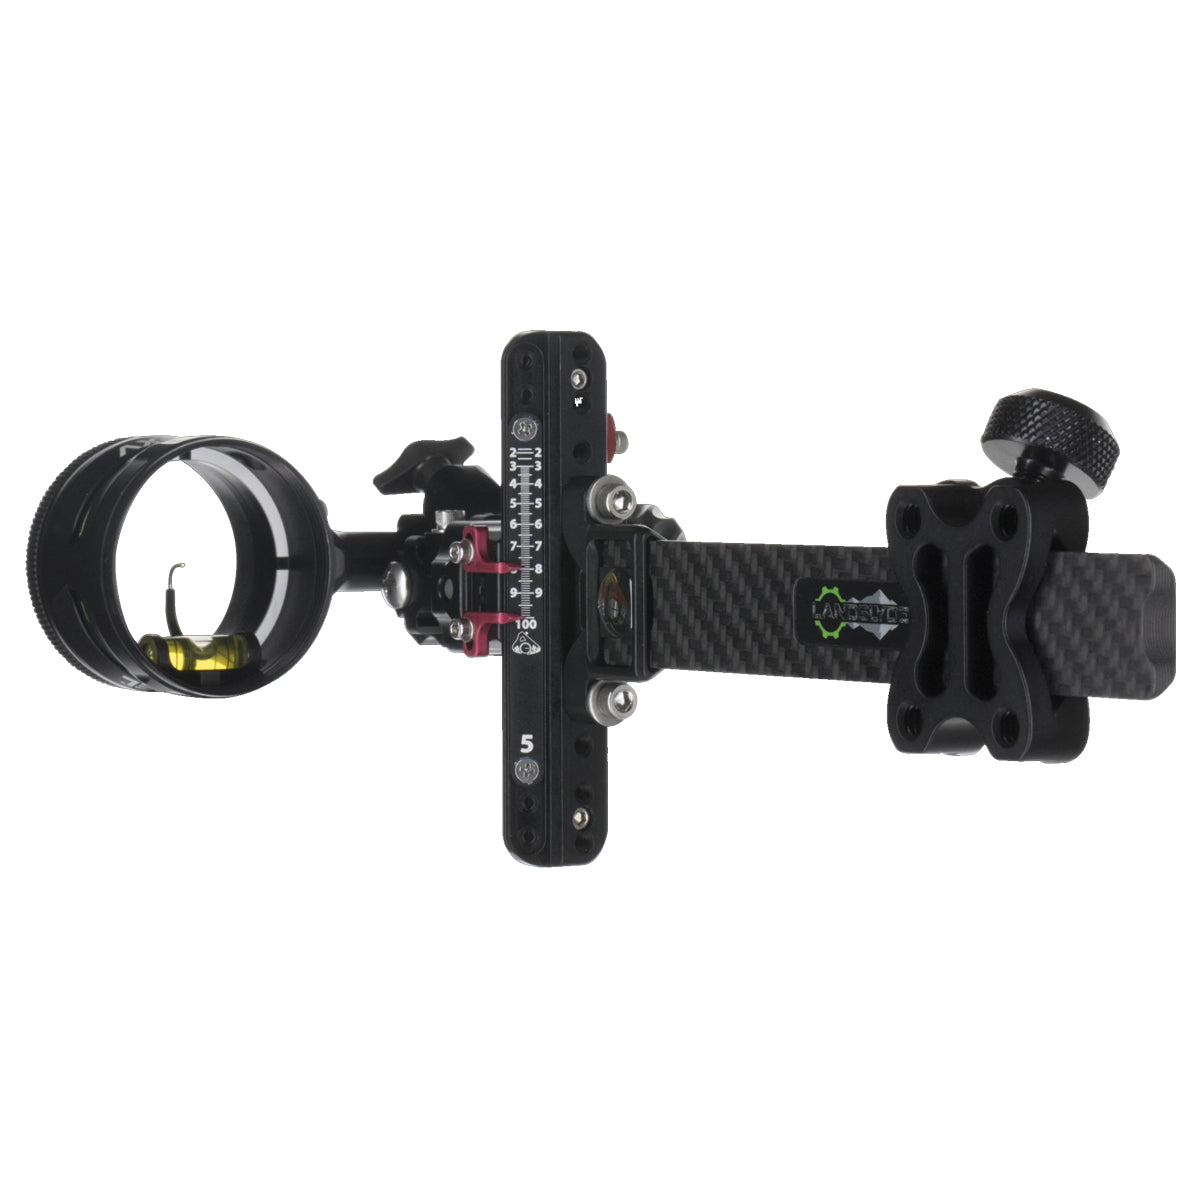 Axcel Landslyde Carbon Pro Single Pin Bow Sight